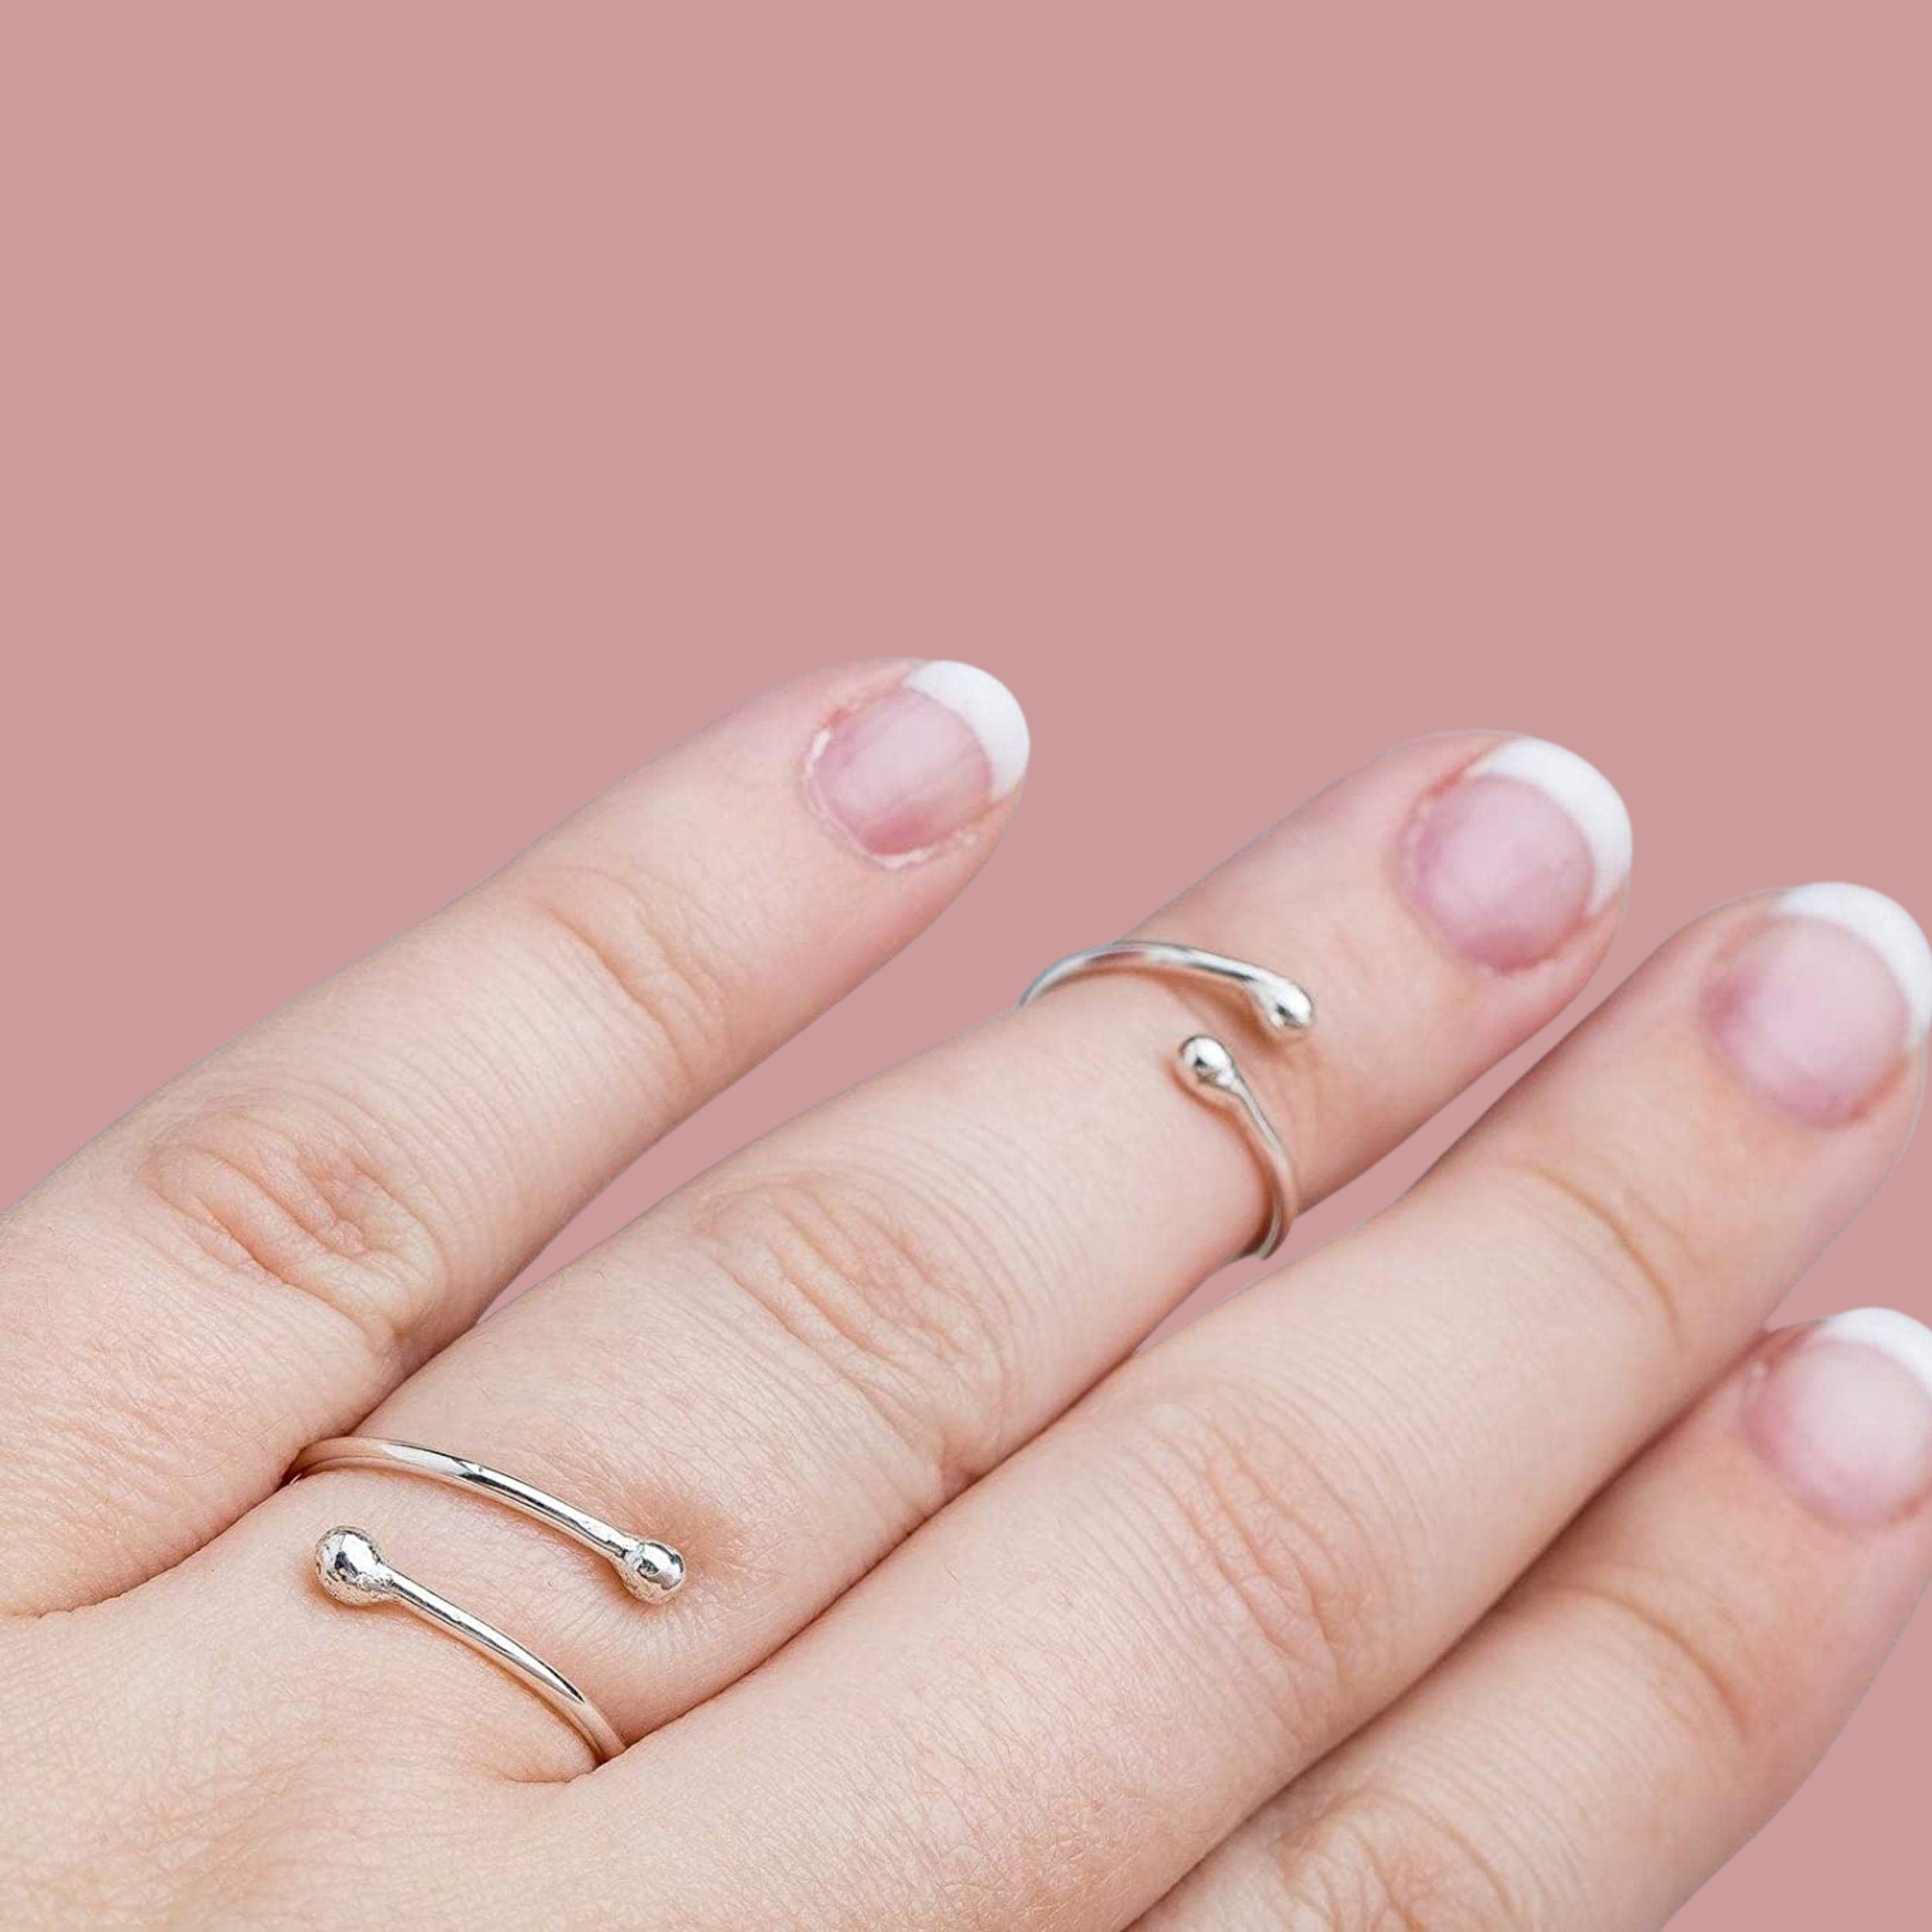 Bypass Midi Ring - Melanie Golden Jewelry - everyday essentials, midi, midi ring, ring band, ring bands, rings, silver